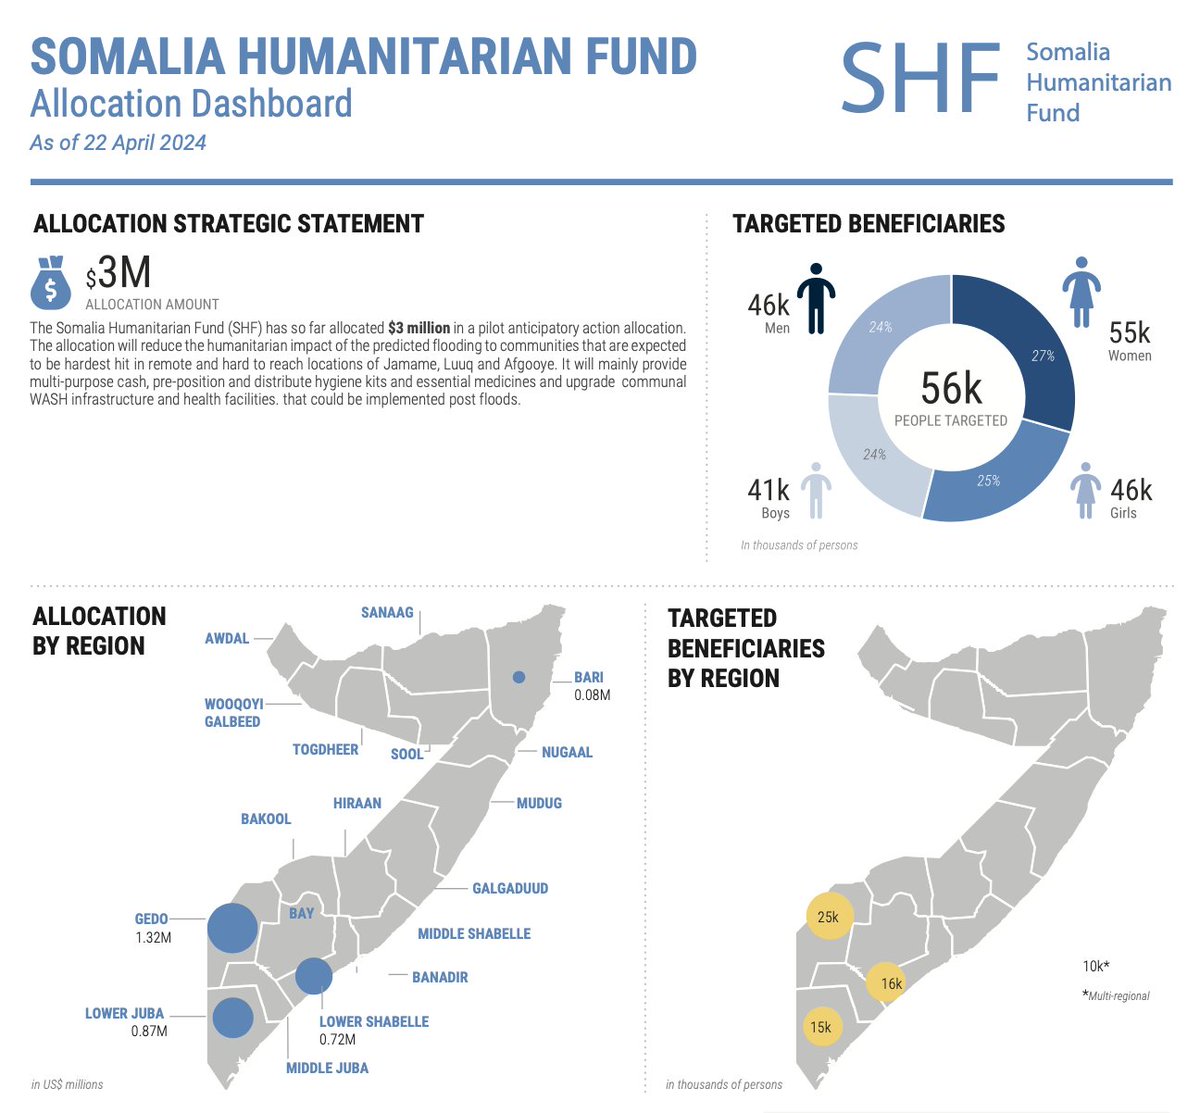 ✔️WASH ✔️Cash ✔️Health This is the assistance @SHF_Somalia partners are providing to vulnerable people at highest risk of being affected by the Gu Rains. Want to learn more? Check out our latest allocation dashboard ➡️ bit.ly/3QfDwei